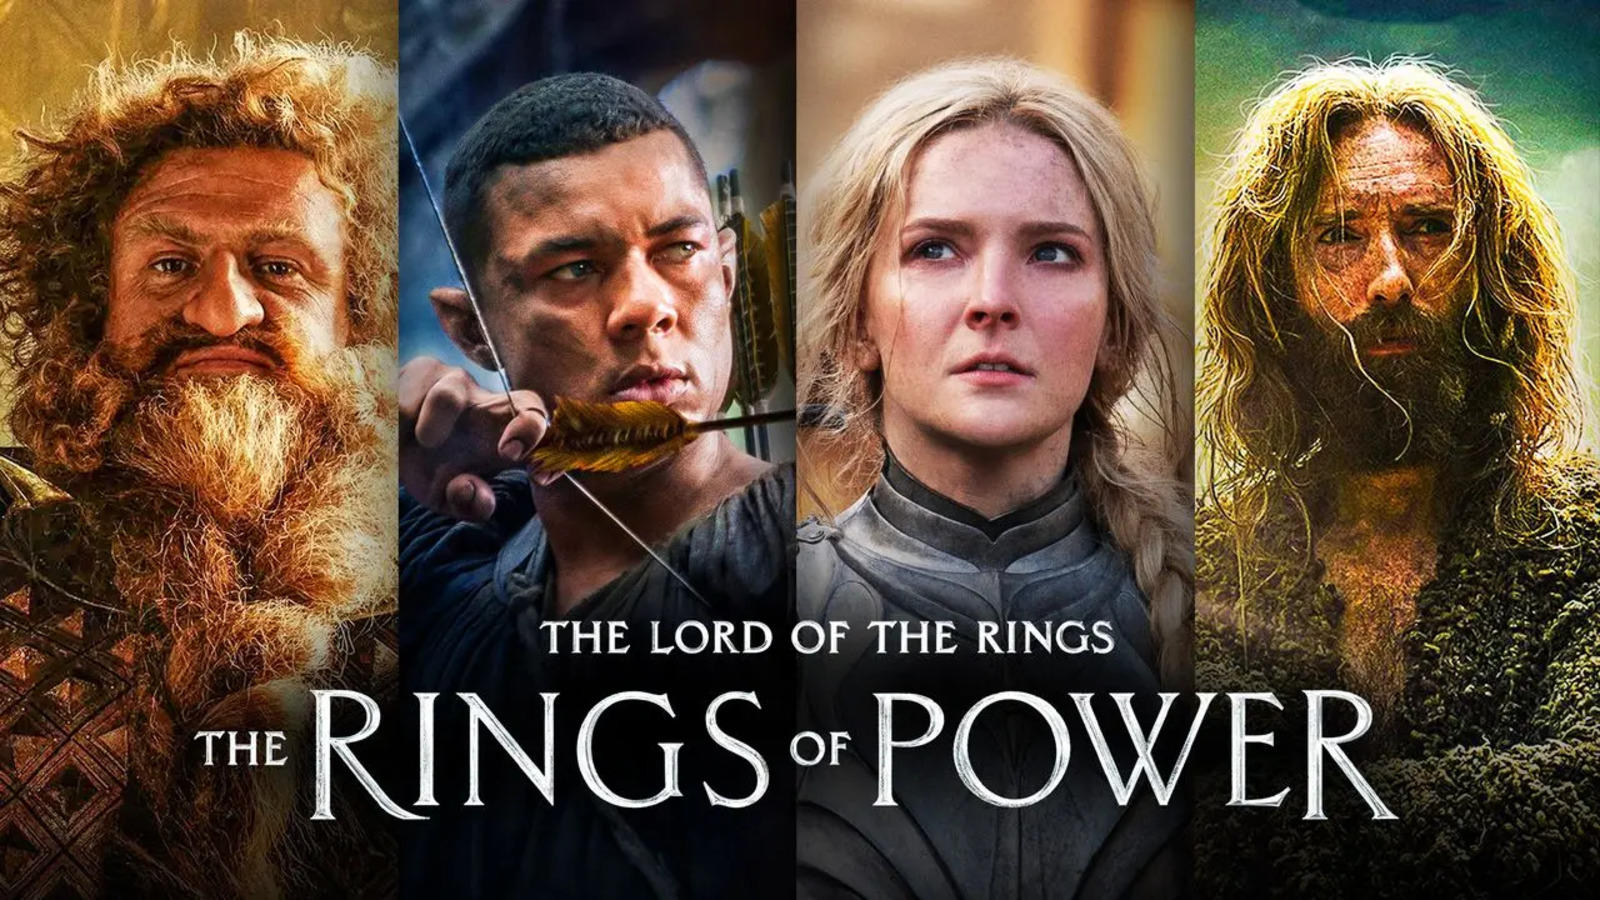 The Lord of the Rings: The Rings of Power Review